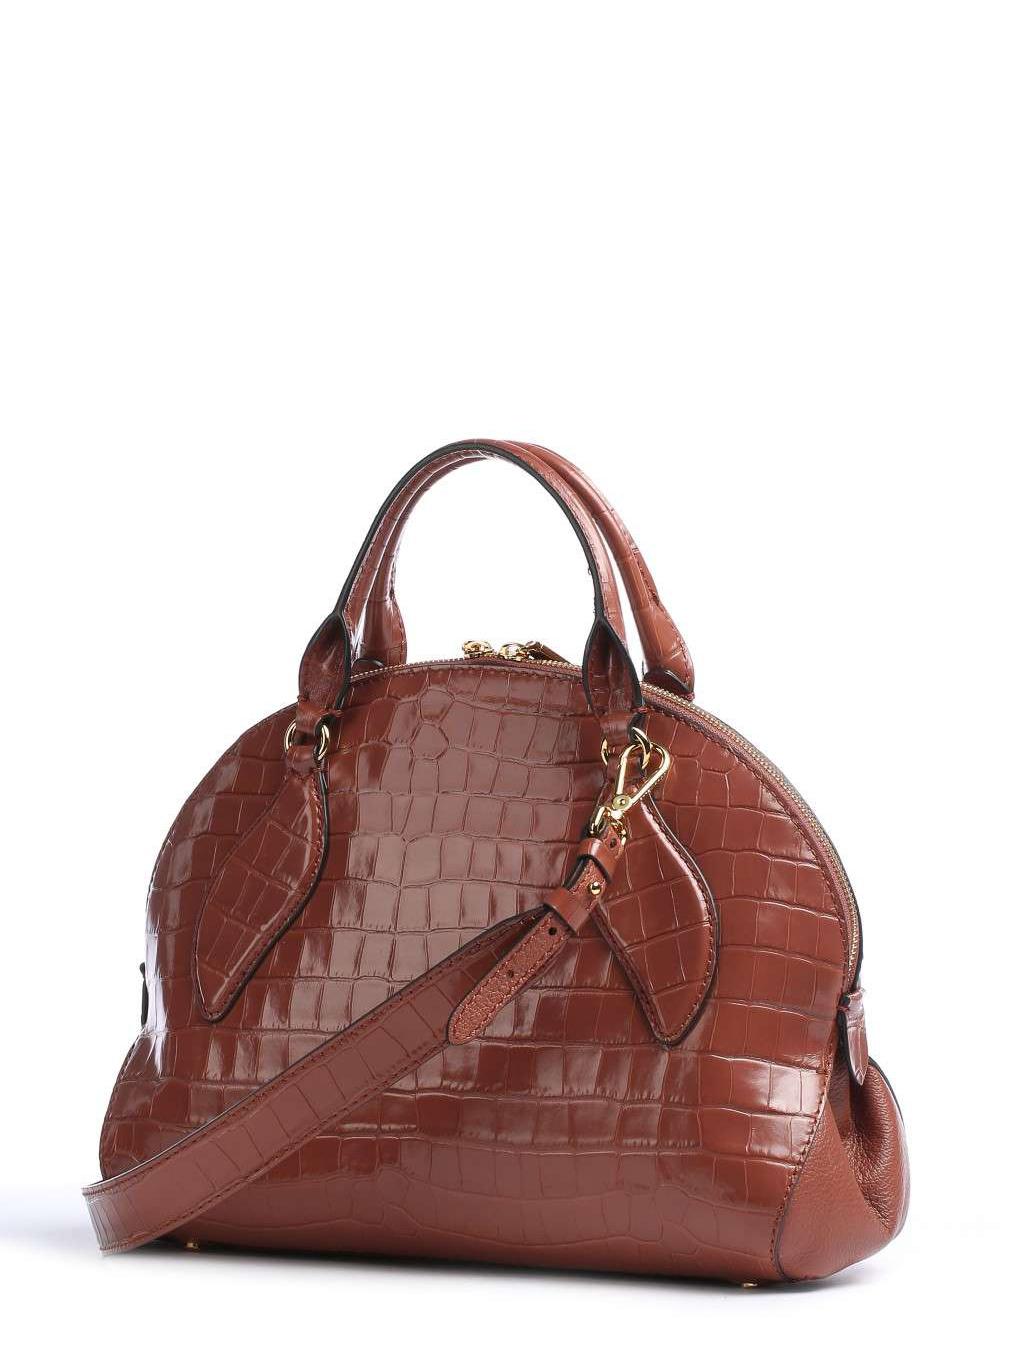 Coccinelle Colette Croco Shiny Soft Handbag, With Shoulder Strap, In Leather  Cinnam - Buy At Outlet Prices!